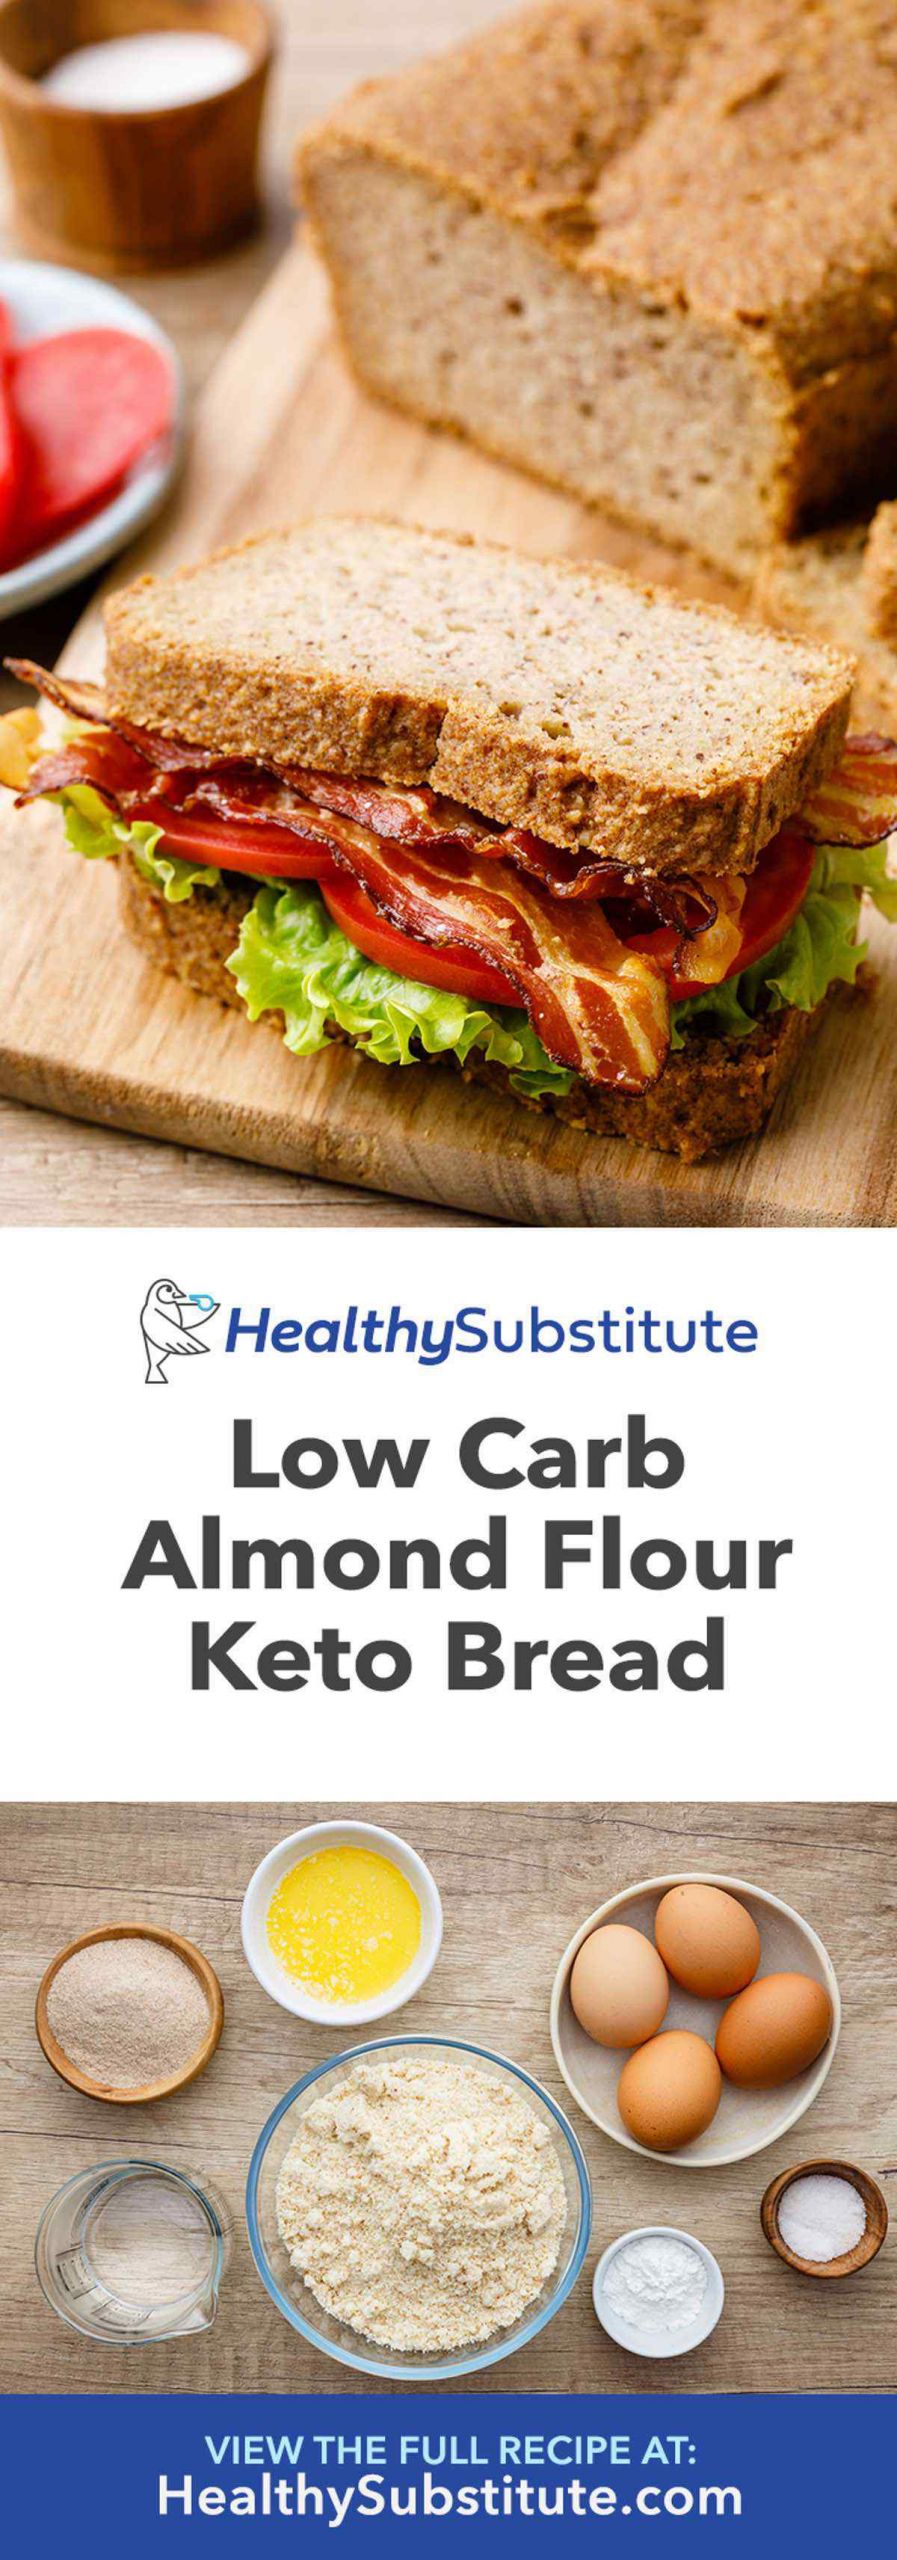 Low Carb Bread Replacement
 Life changing Almond Flour Bread Recipe Keto Friendly